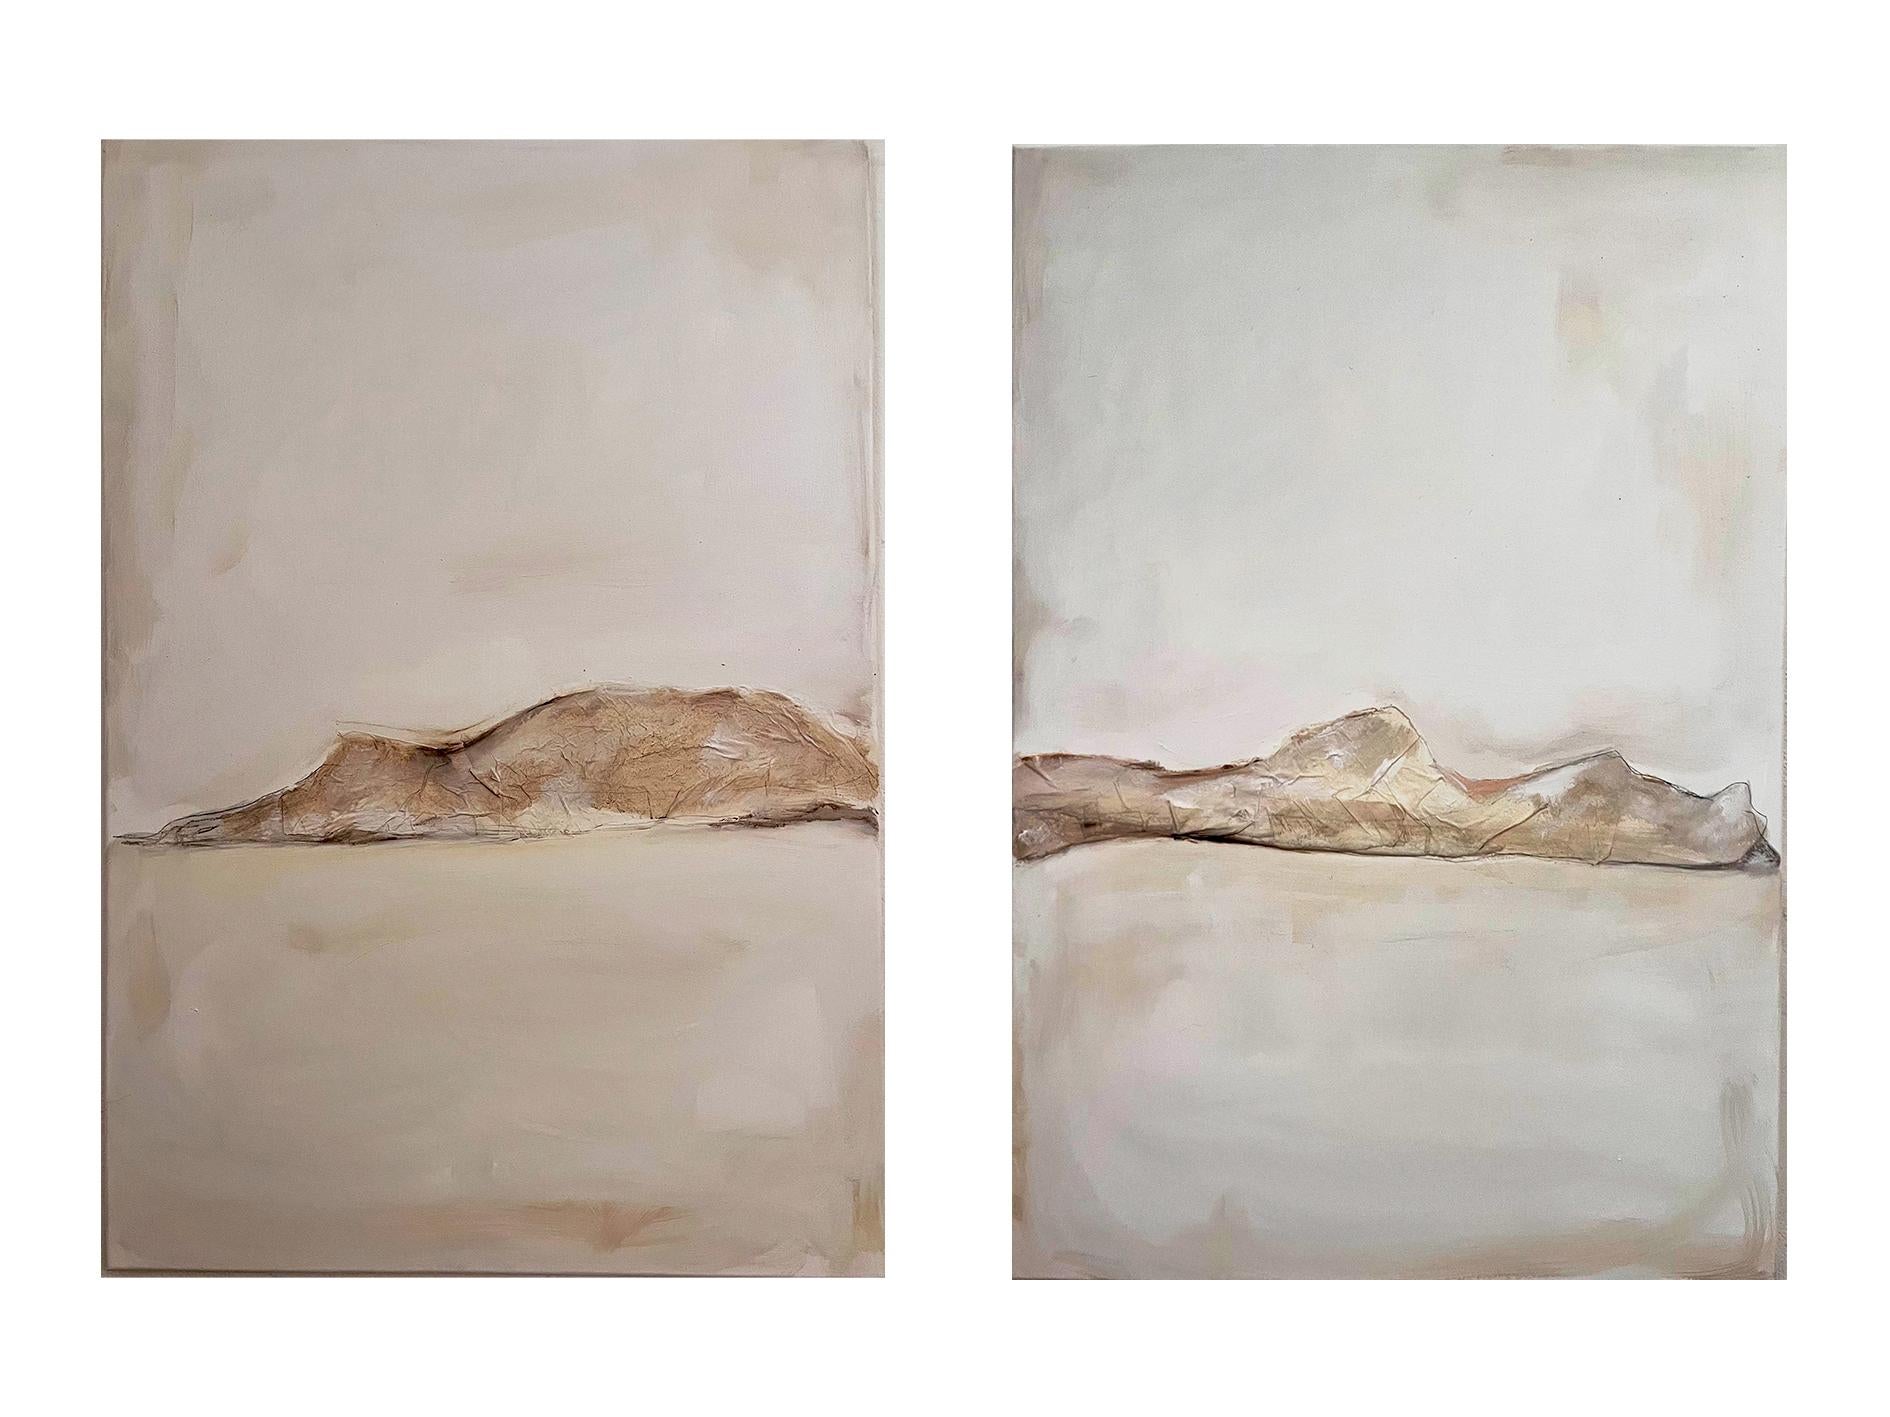 White landscape
oil painting on canvas
original painting
one of a kind
diptych
overall dimensions 130x92
(65x92 each single canvas)


Marilina Marchica, born in 1984, was born in Agrigento, where she lives and works. She graduated in Painting at the